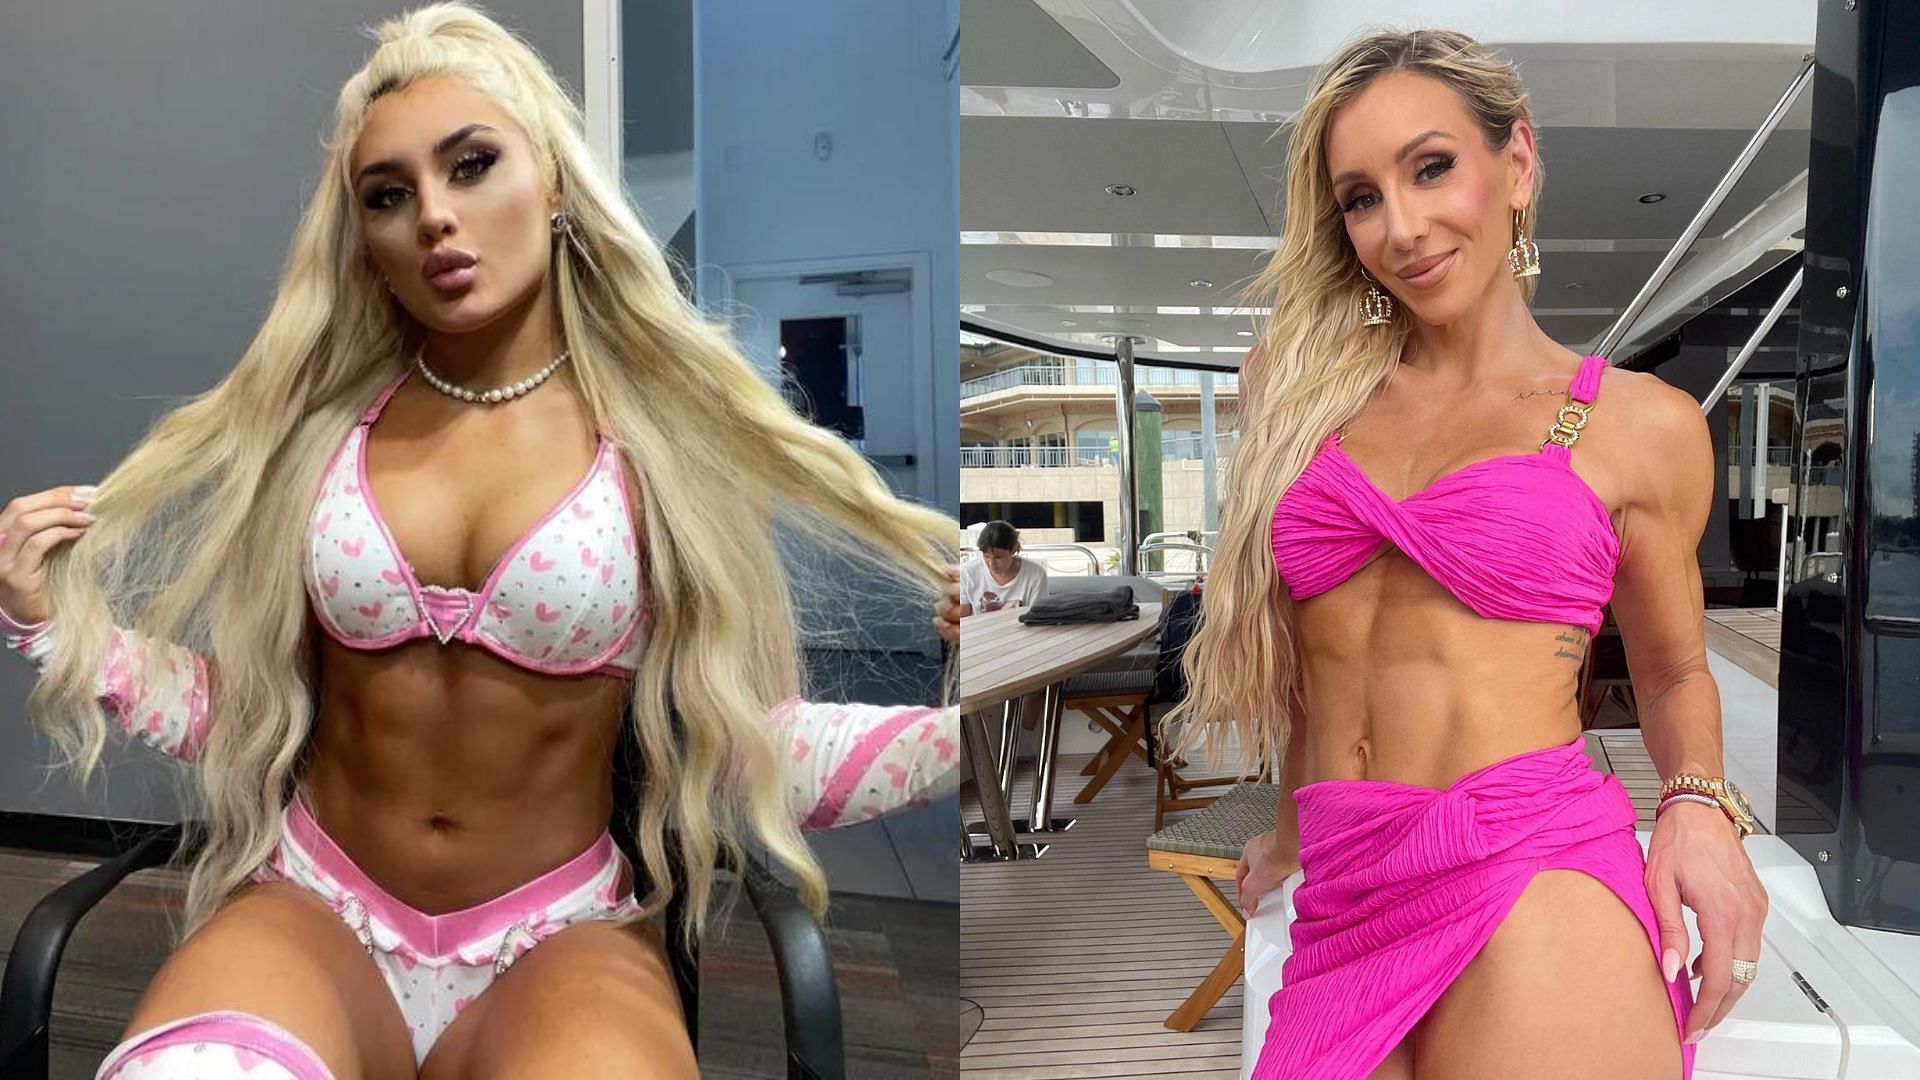 Tiffany Stratton was recently spotted with Charlotte Flair